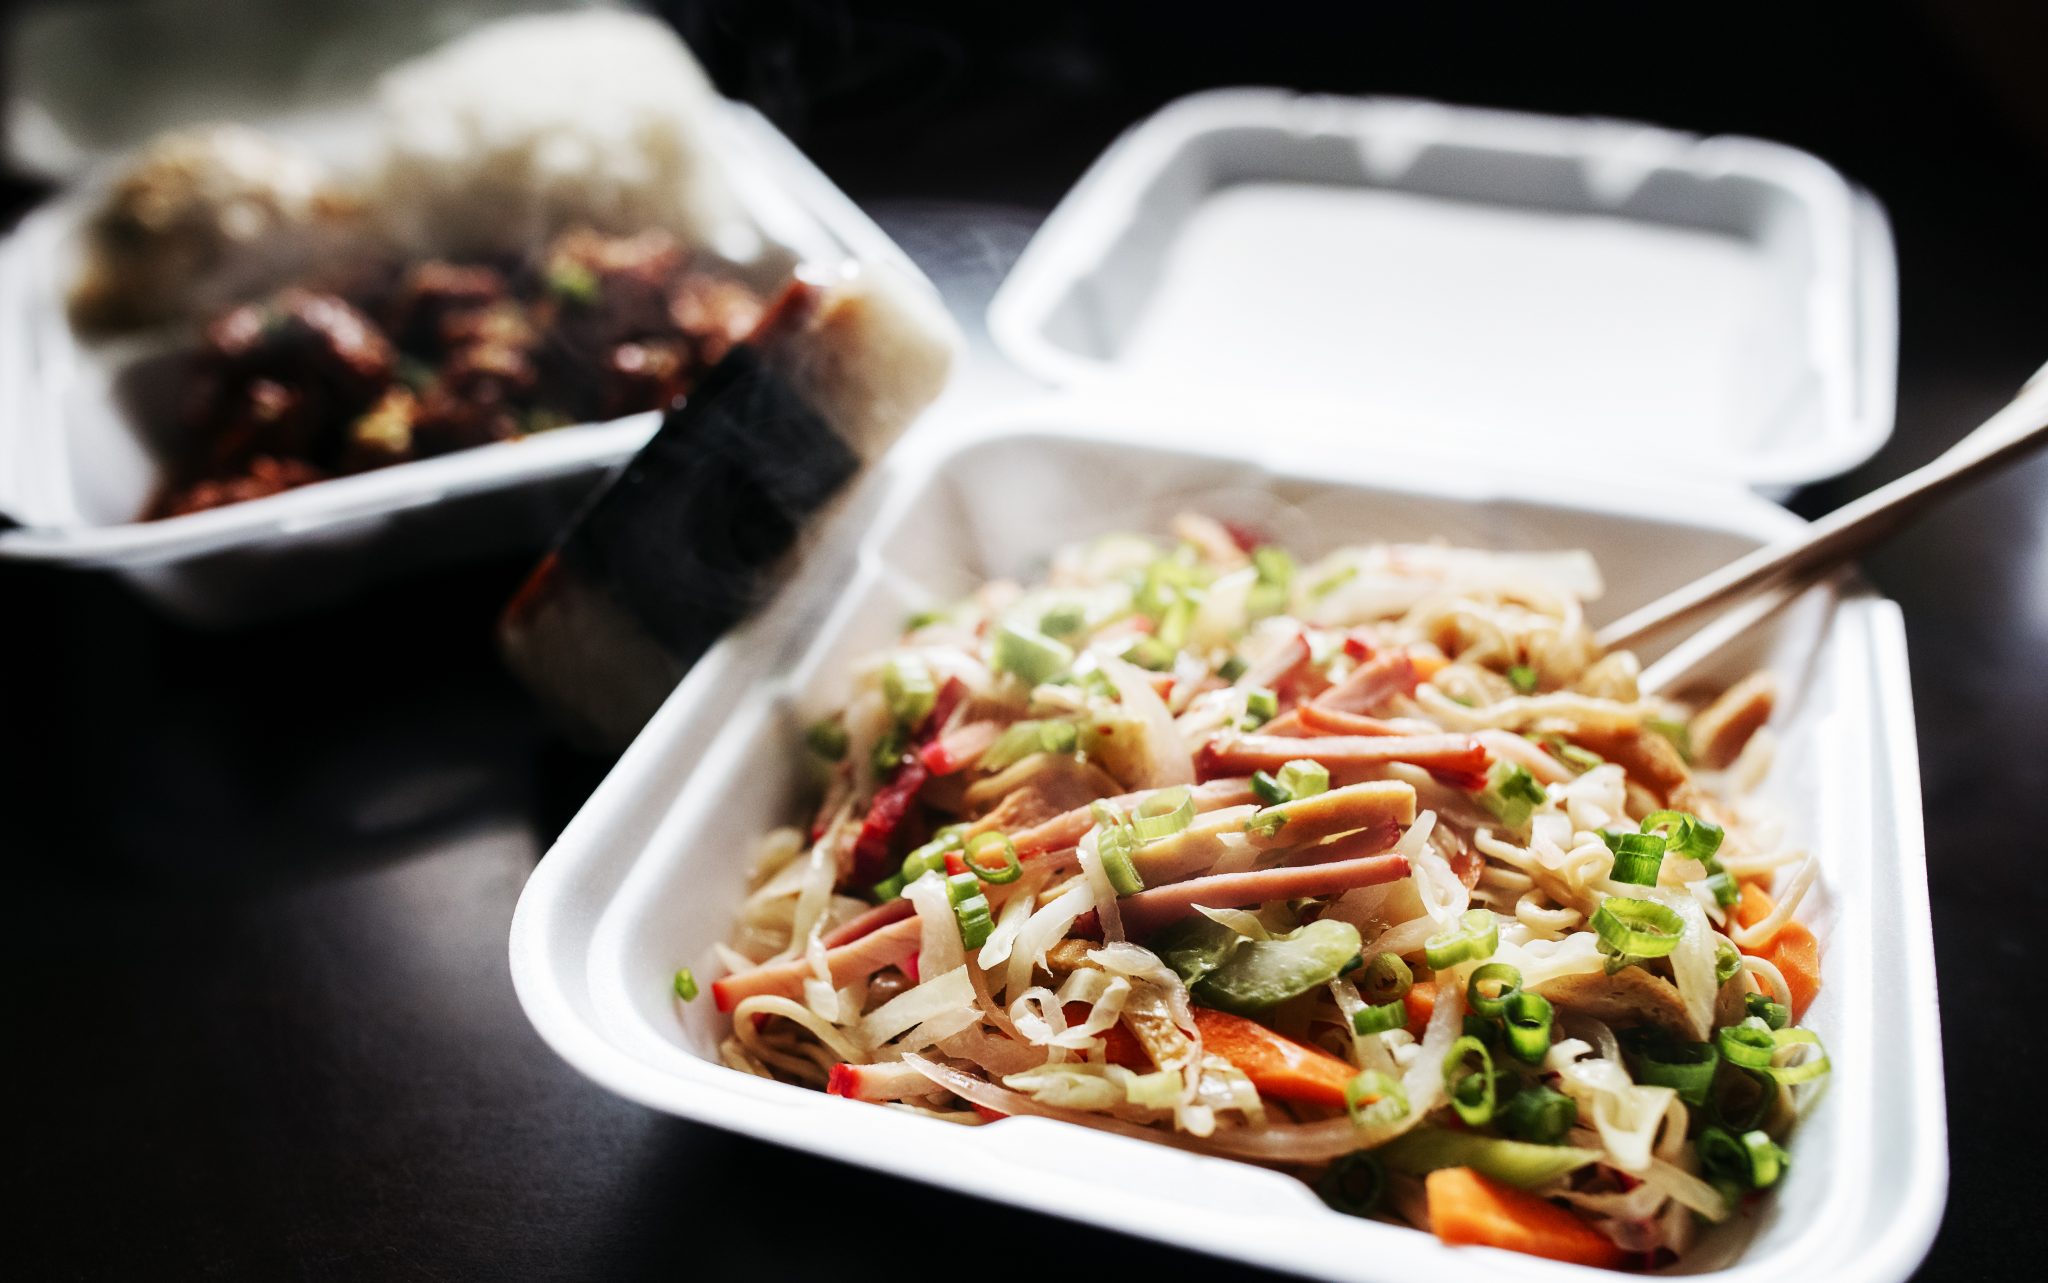 Fresh takeout meal from Saimin Says in Renton, WA.